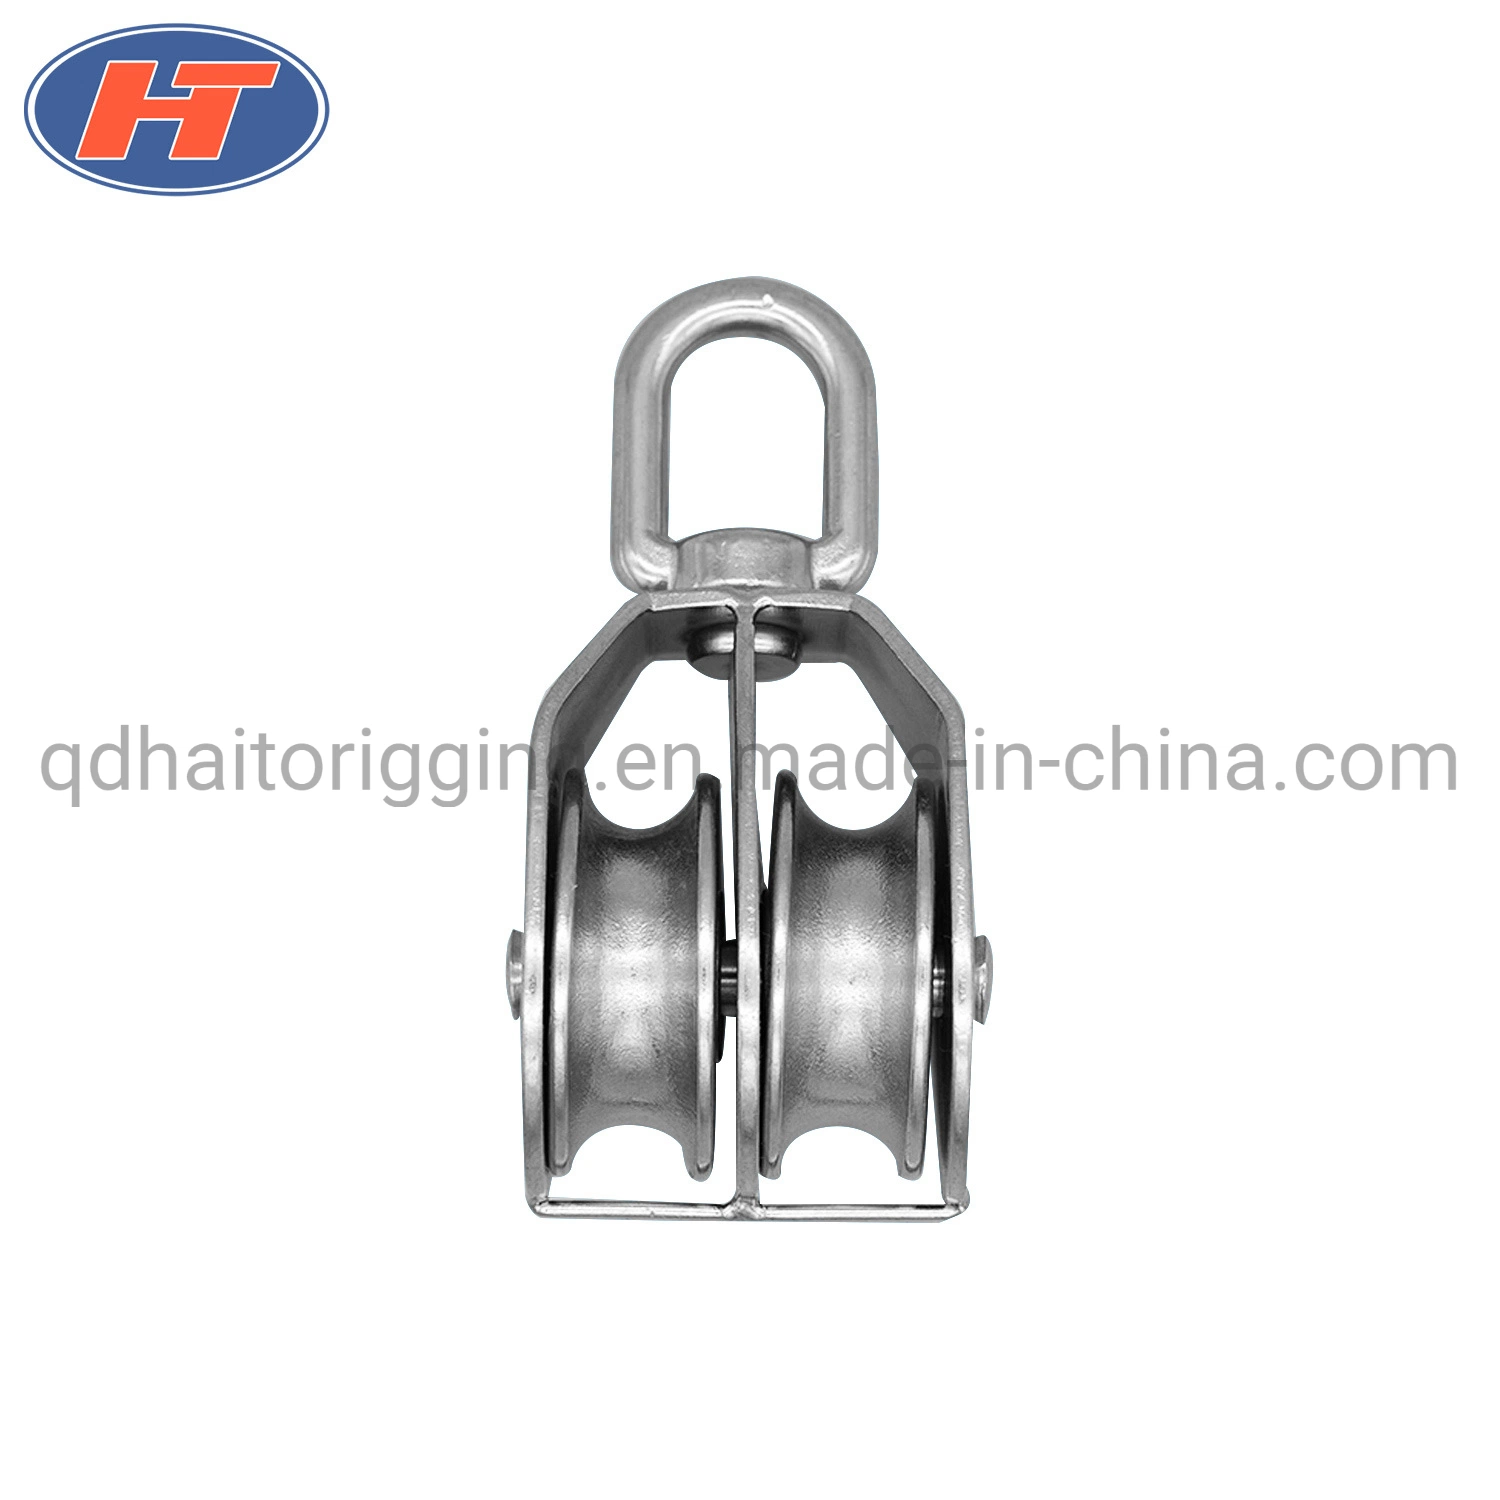 High Quality Stainless Steel Snatch Block Pulley with Double Wheels or Single Wheel